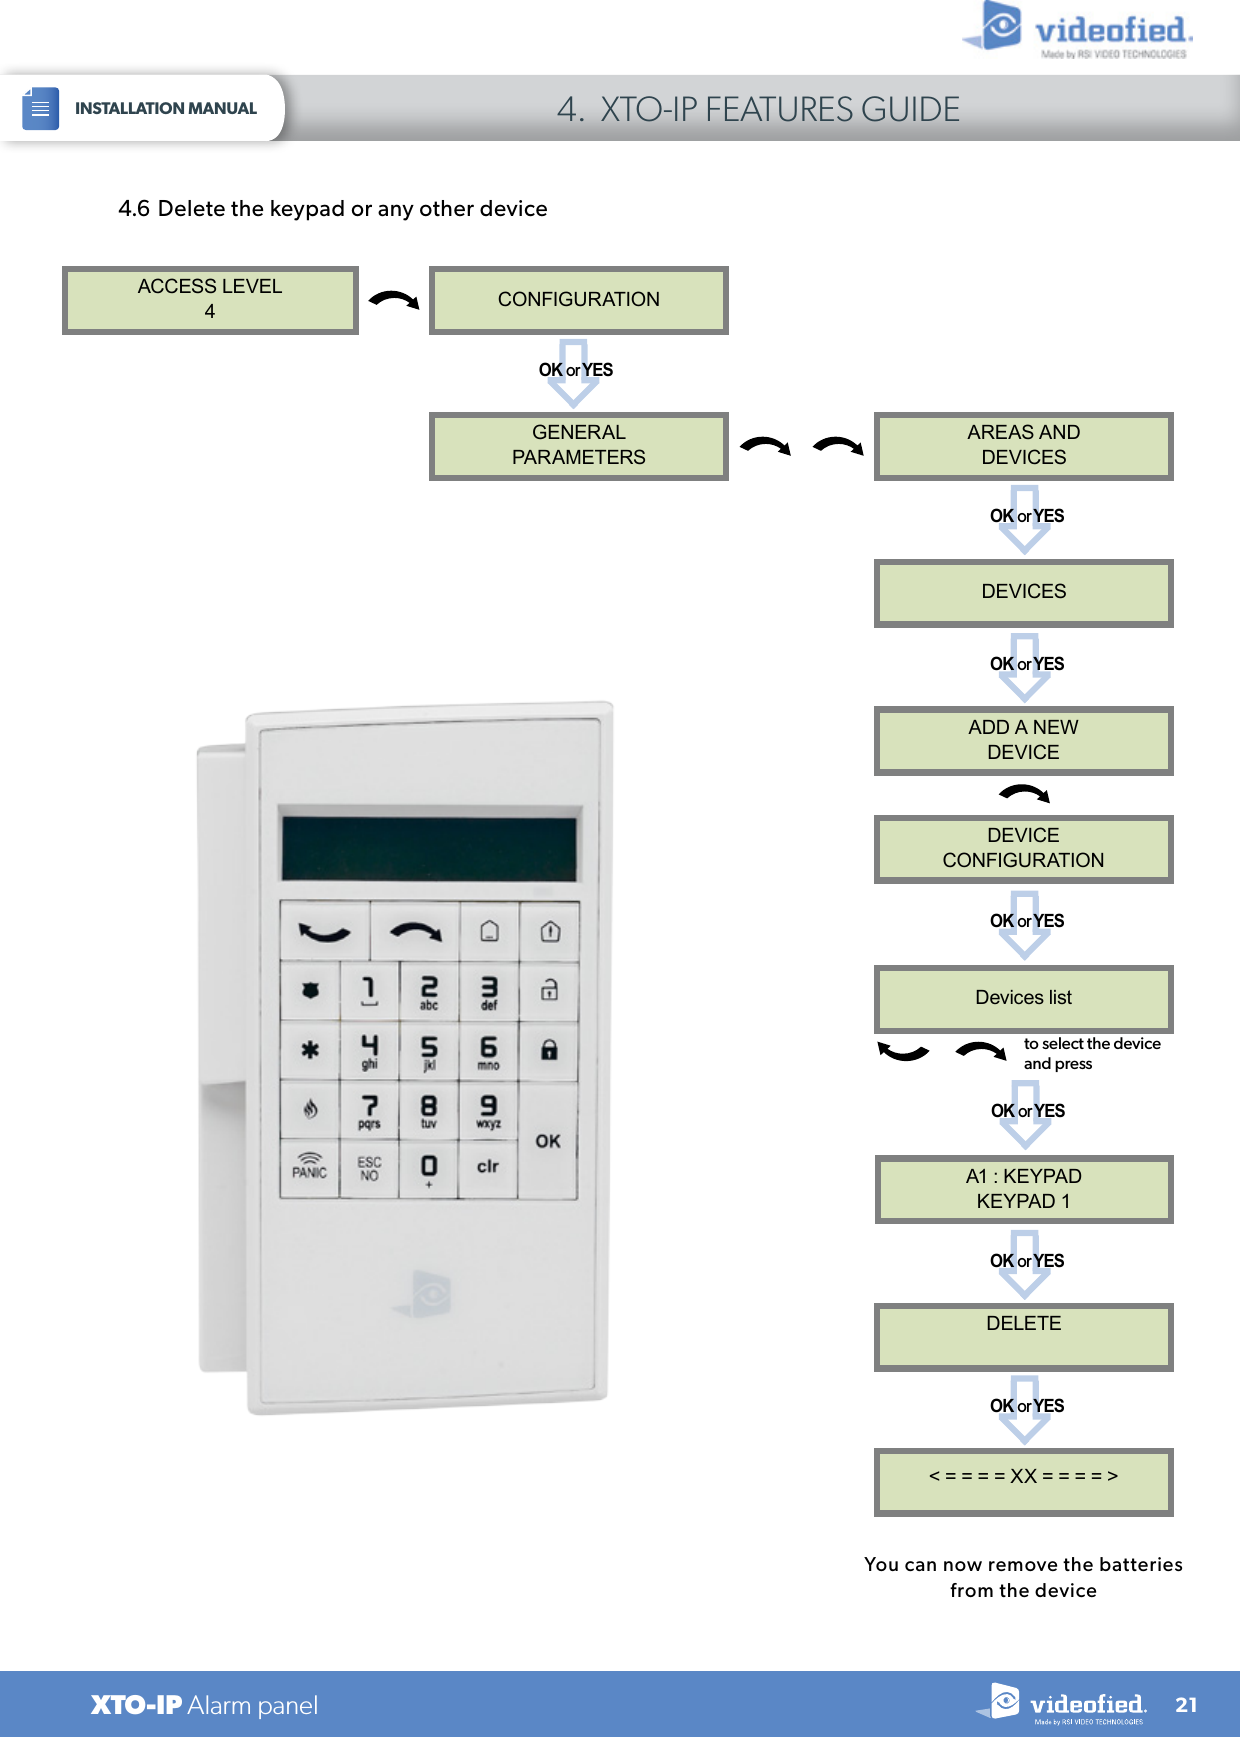 21INSTALLATION MANUAL 4.  XTO-IP FEATURES GUIDEXTO-IP Alarm panel4.6  Delete the keypad or any other deviceYou can now remove the batteries from the deviceACCESS LEVEL4CONFIGURATIONGENERALPARAMETERSOK or YESto select the device and pressOK or YES&lt; = = = = XX = = = = &gt;DELETEAREAS ANDDEVICESDEVICESADD A NEWDEVICEDEVICECONFIGURATIONA1 : KEYPADKEYPAD 1OK or YESOK or YESOK or YESDevices listOK or YESOK or YES